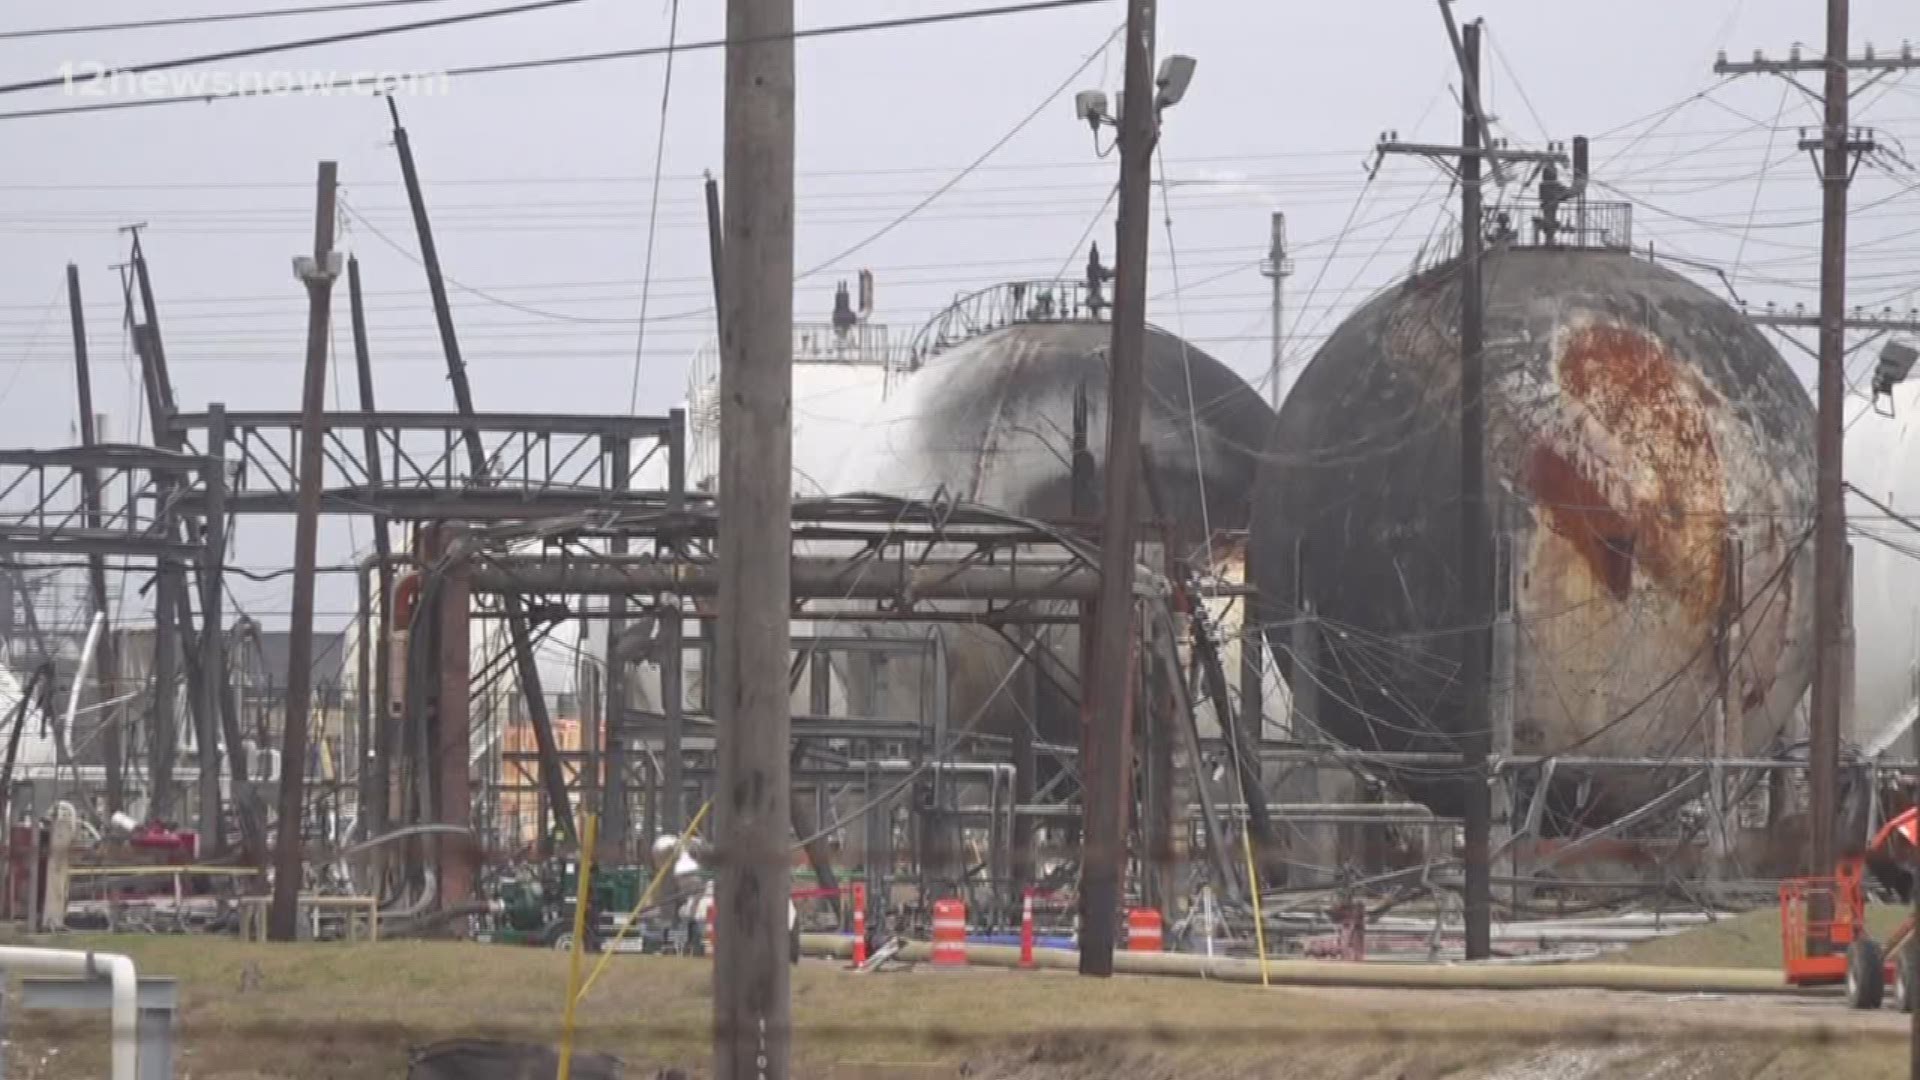 Officials say they are planning on re-opening the TPC Group Plant.